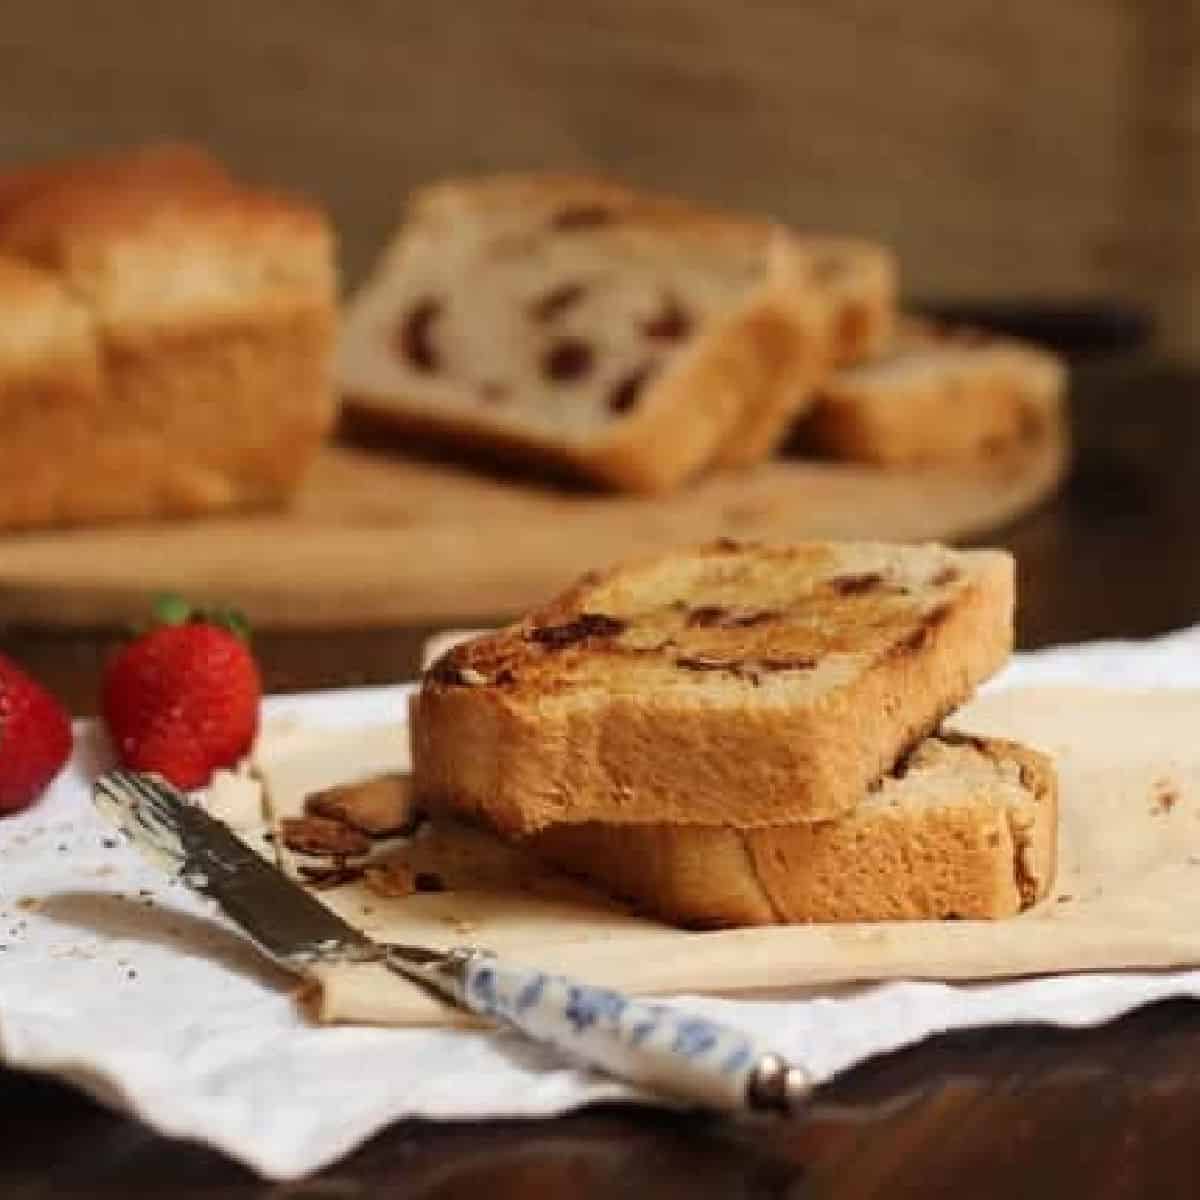 Slices of cinnamon bread on white cloth, dark surface, a butter knife, whole bread in the background.